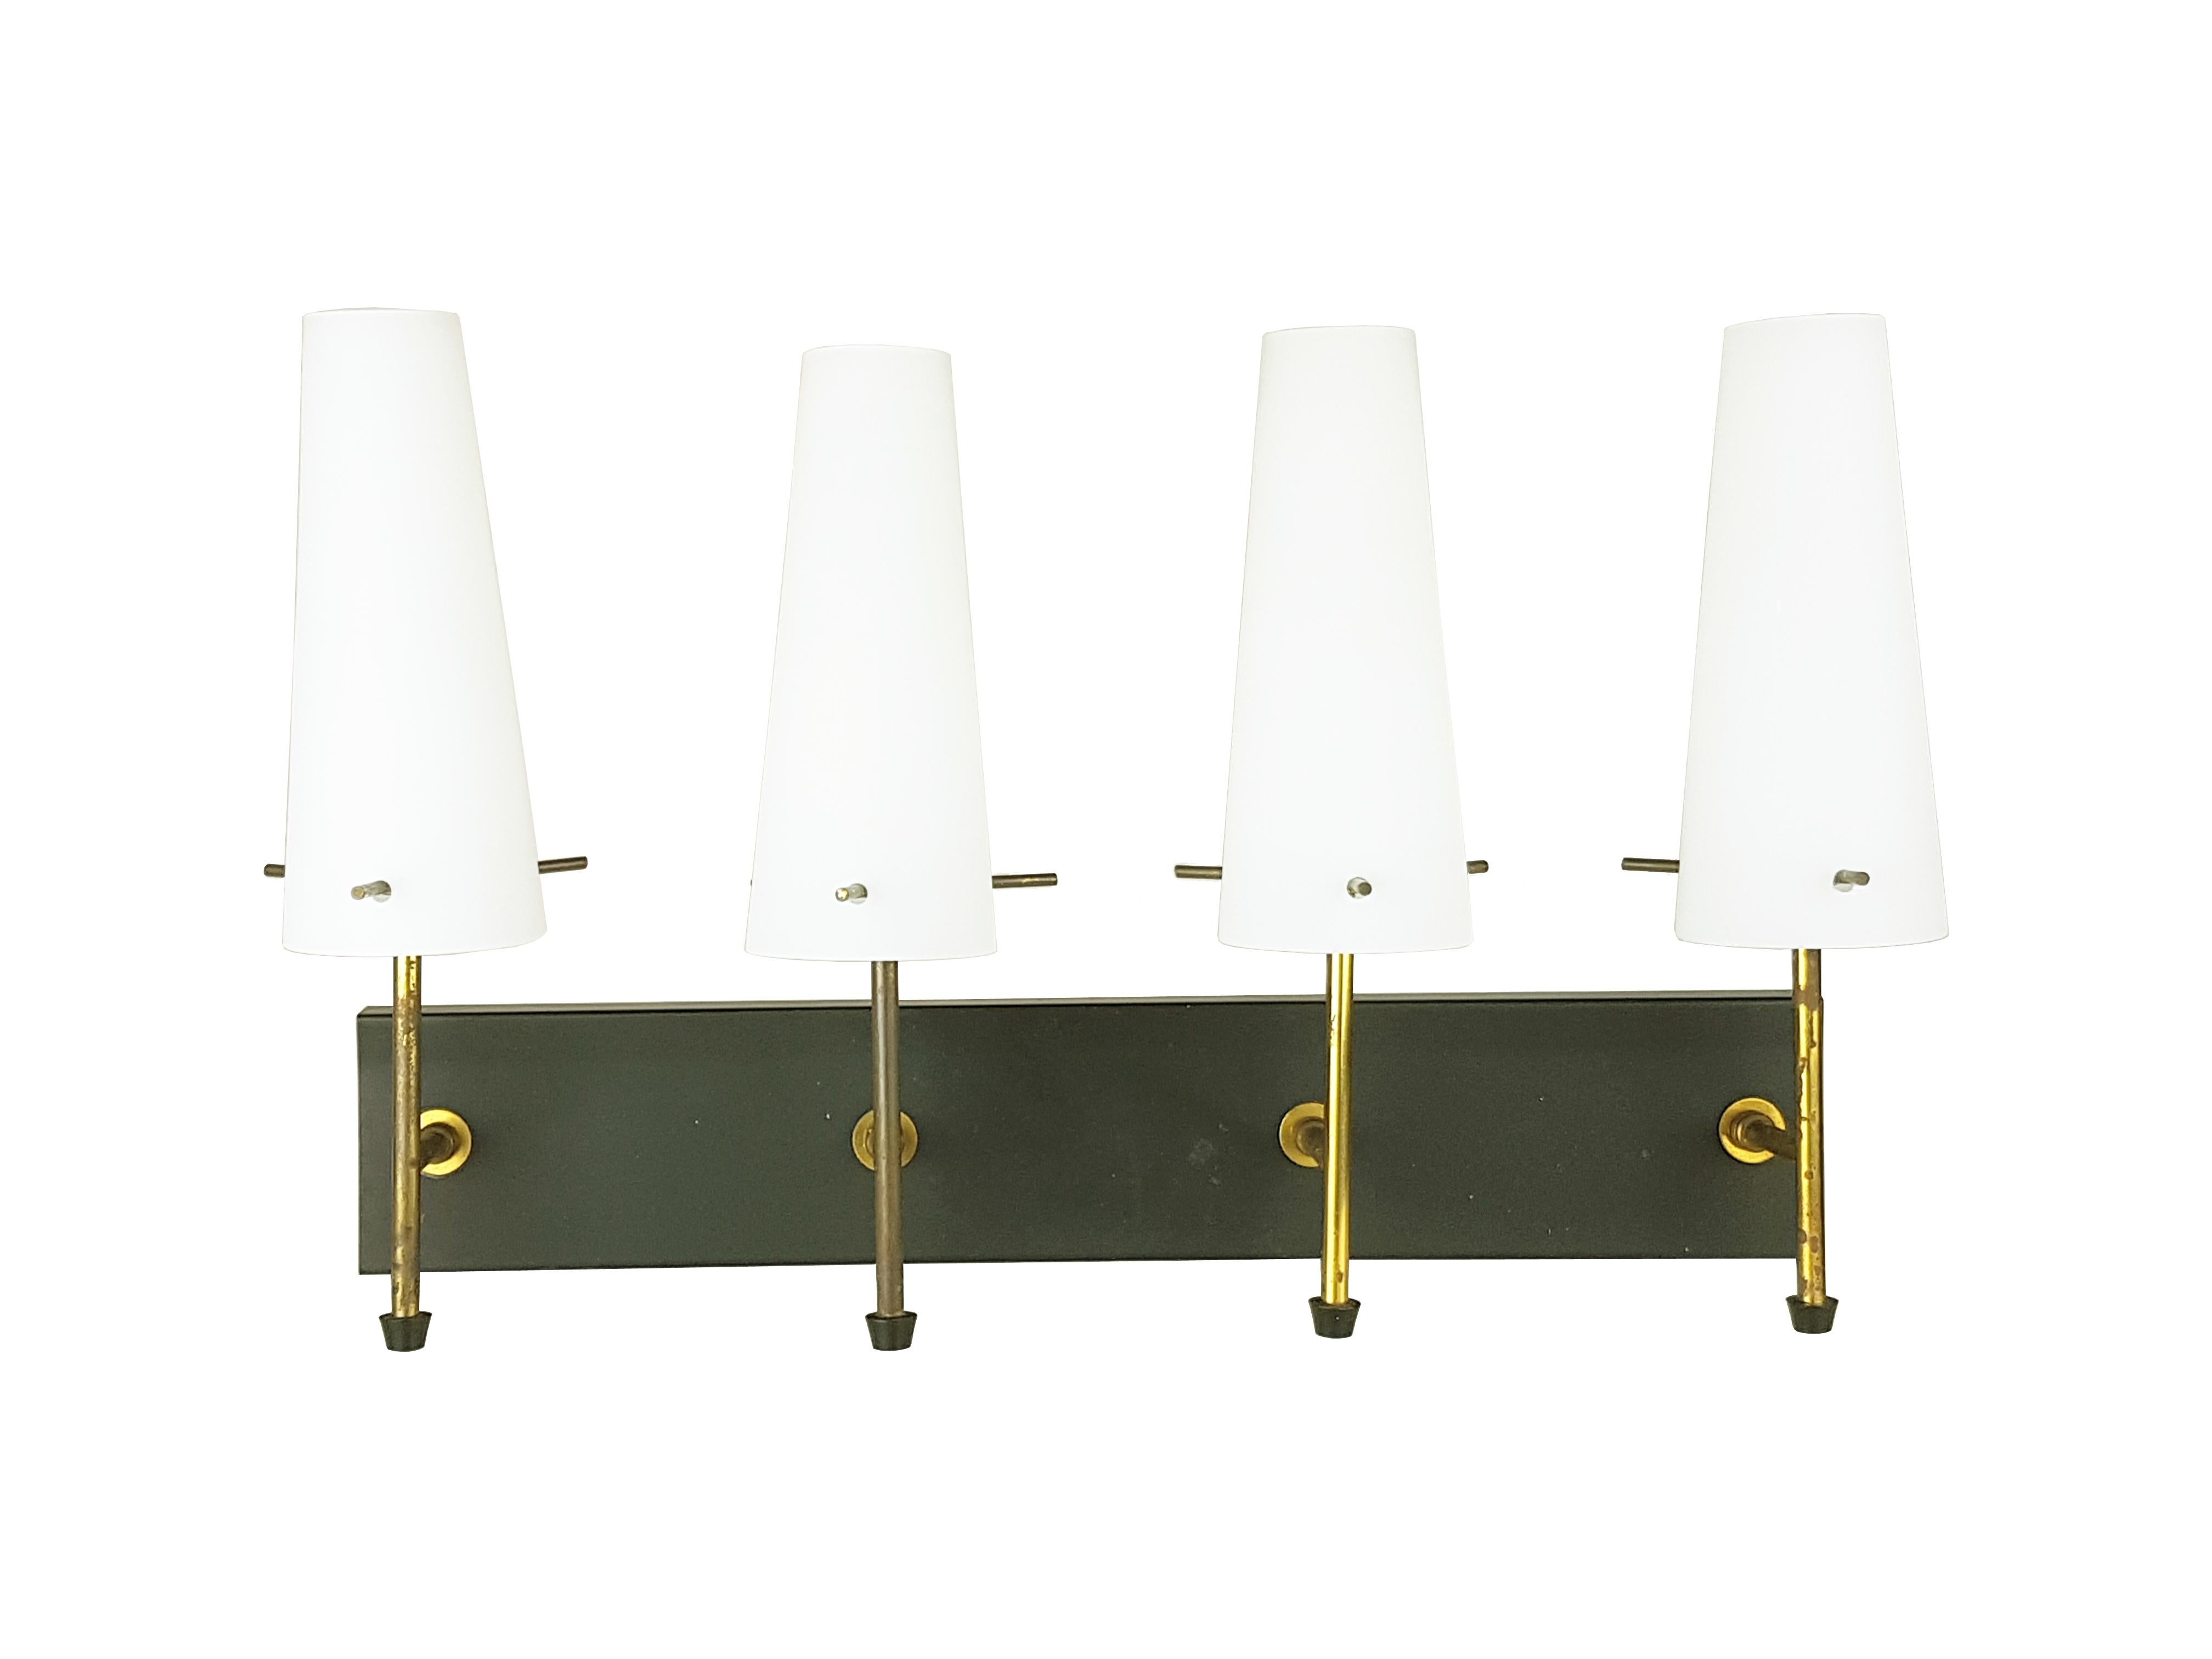 Set of 5 wall lamps made in Italy in the 1950s.
Each lamp is equipped with 4 lamp holders with relative sandblasted glass lampshades supported by 3 cylindrical brass supports.
Main support in folded and painted sheet metal with brass